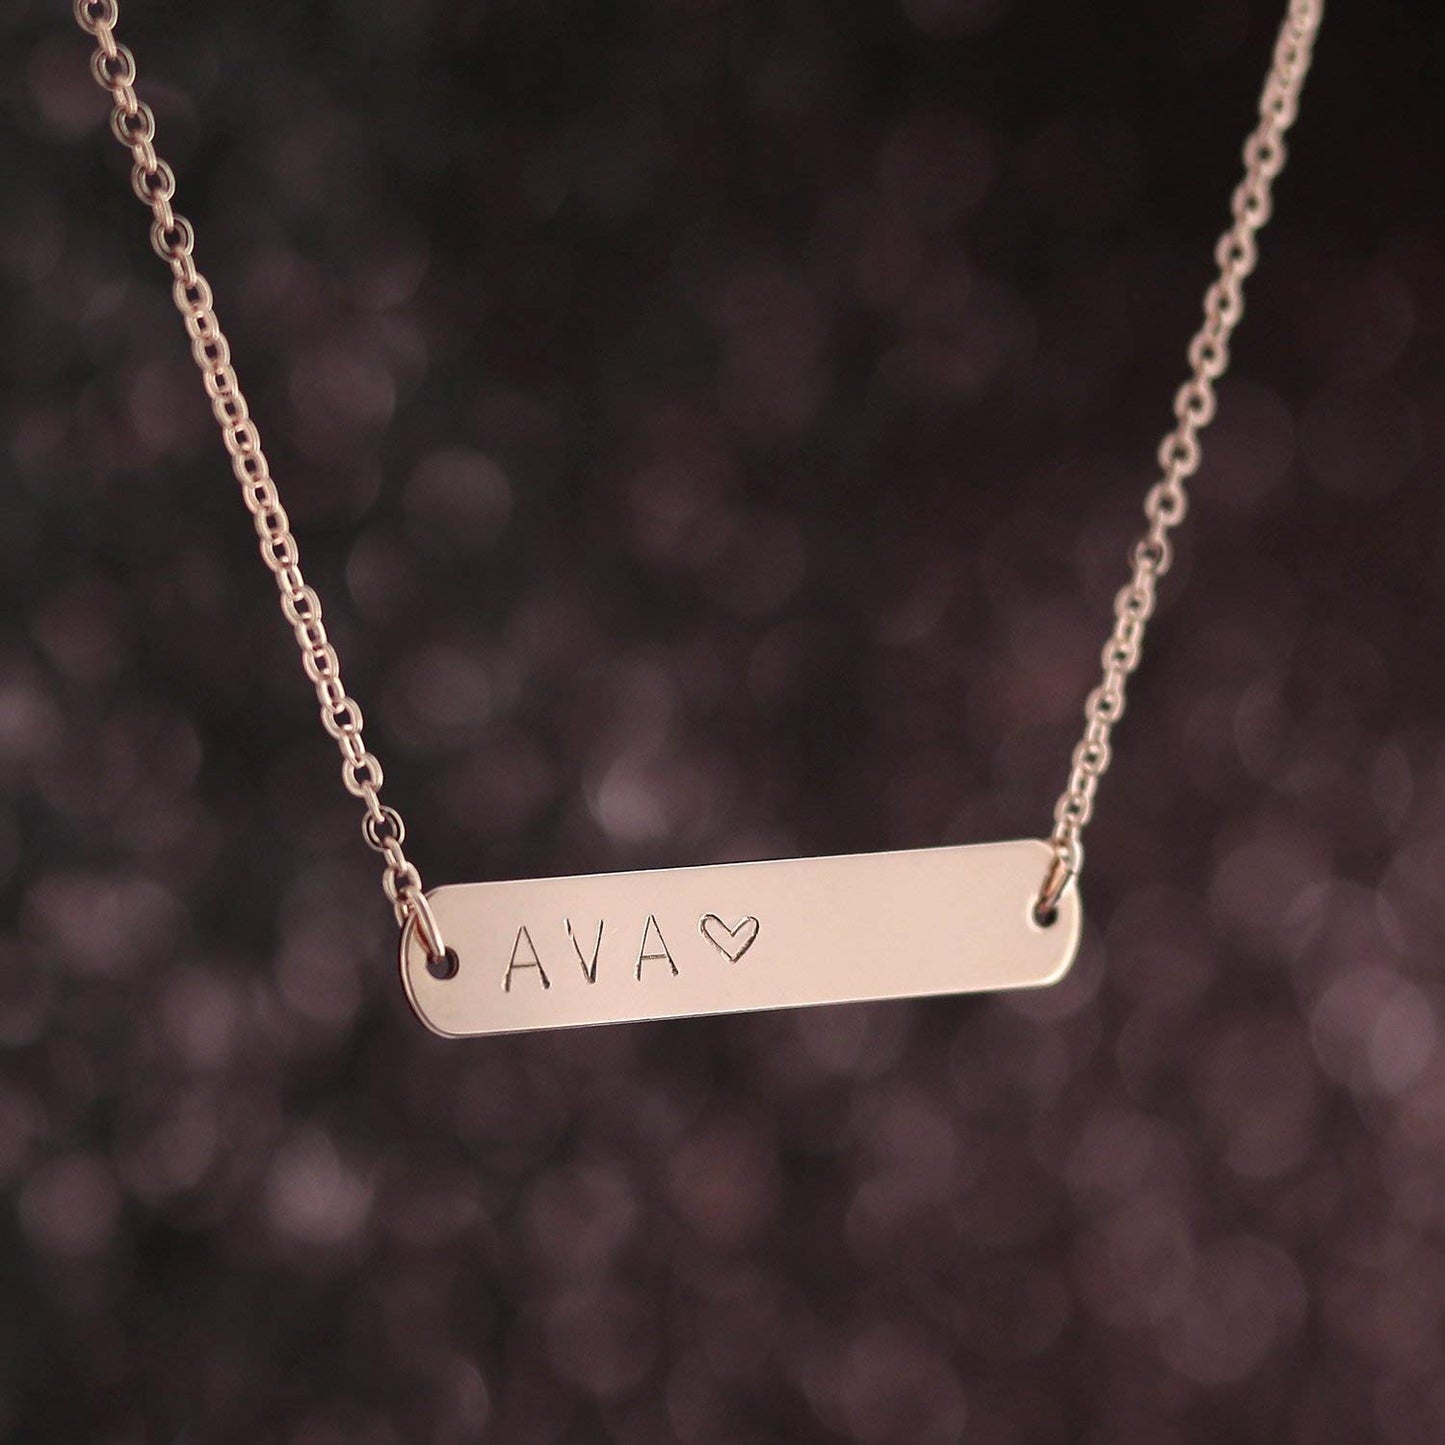 Buy Custom Nameplate Necklace - Personalized Design Fonts at Petite Boutique